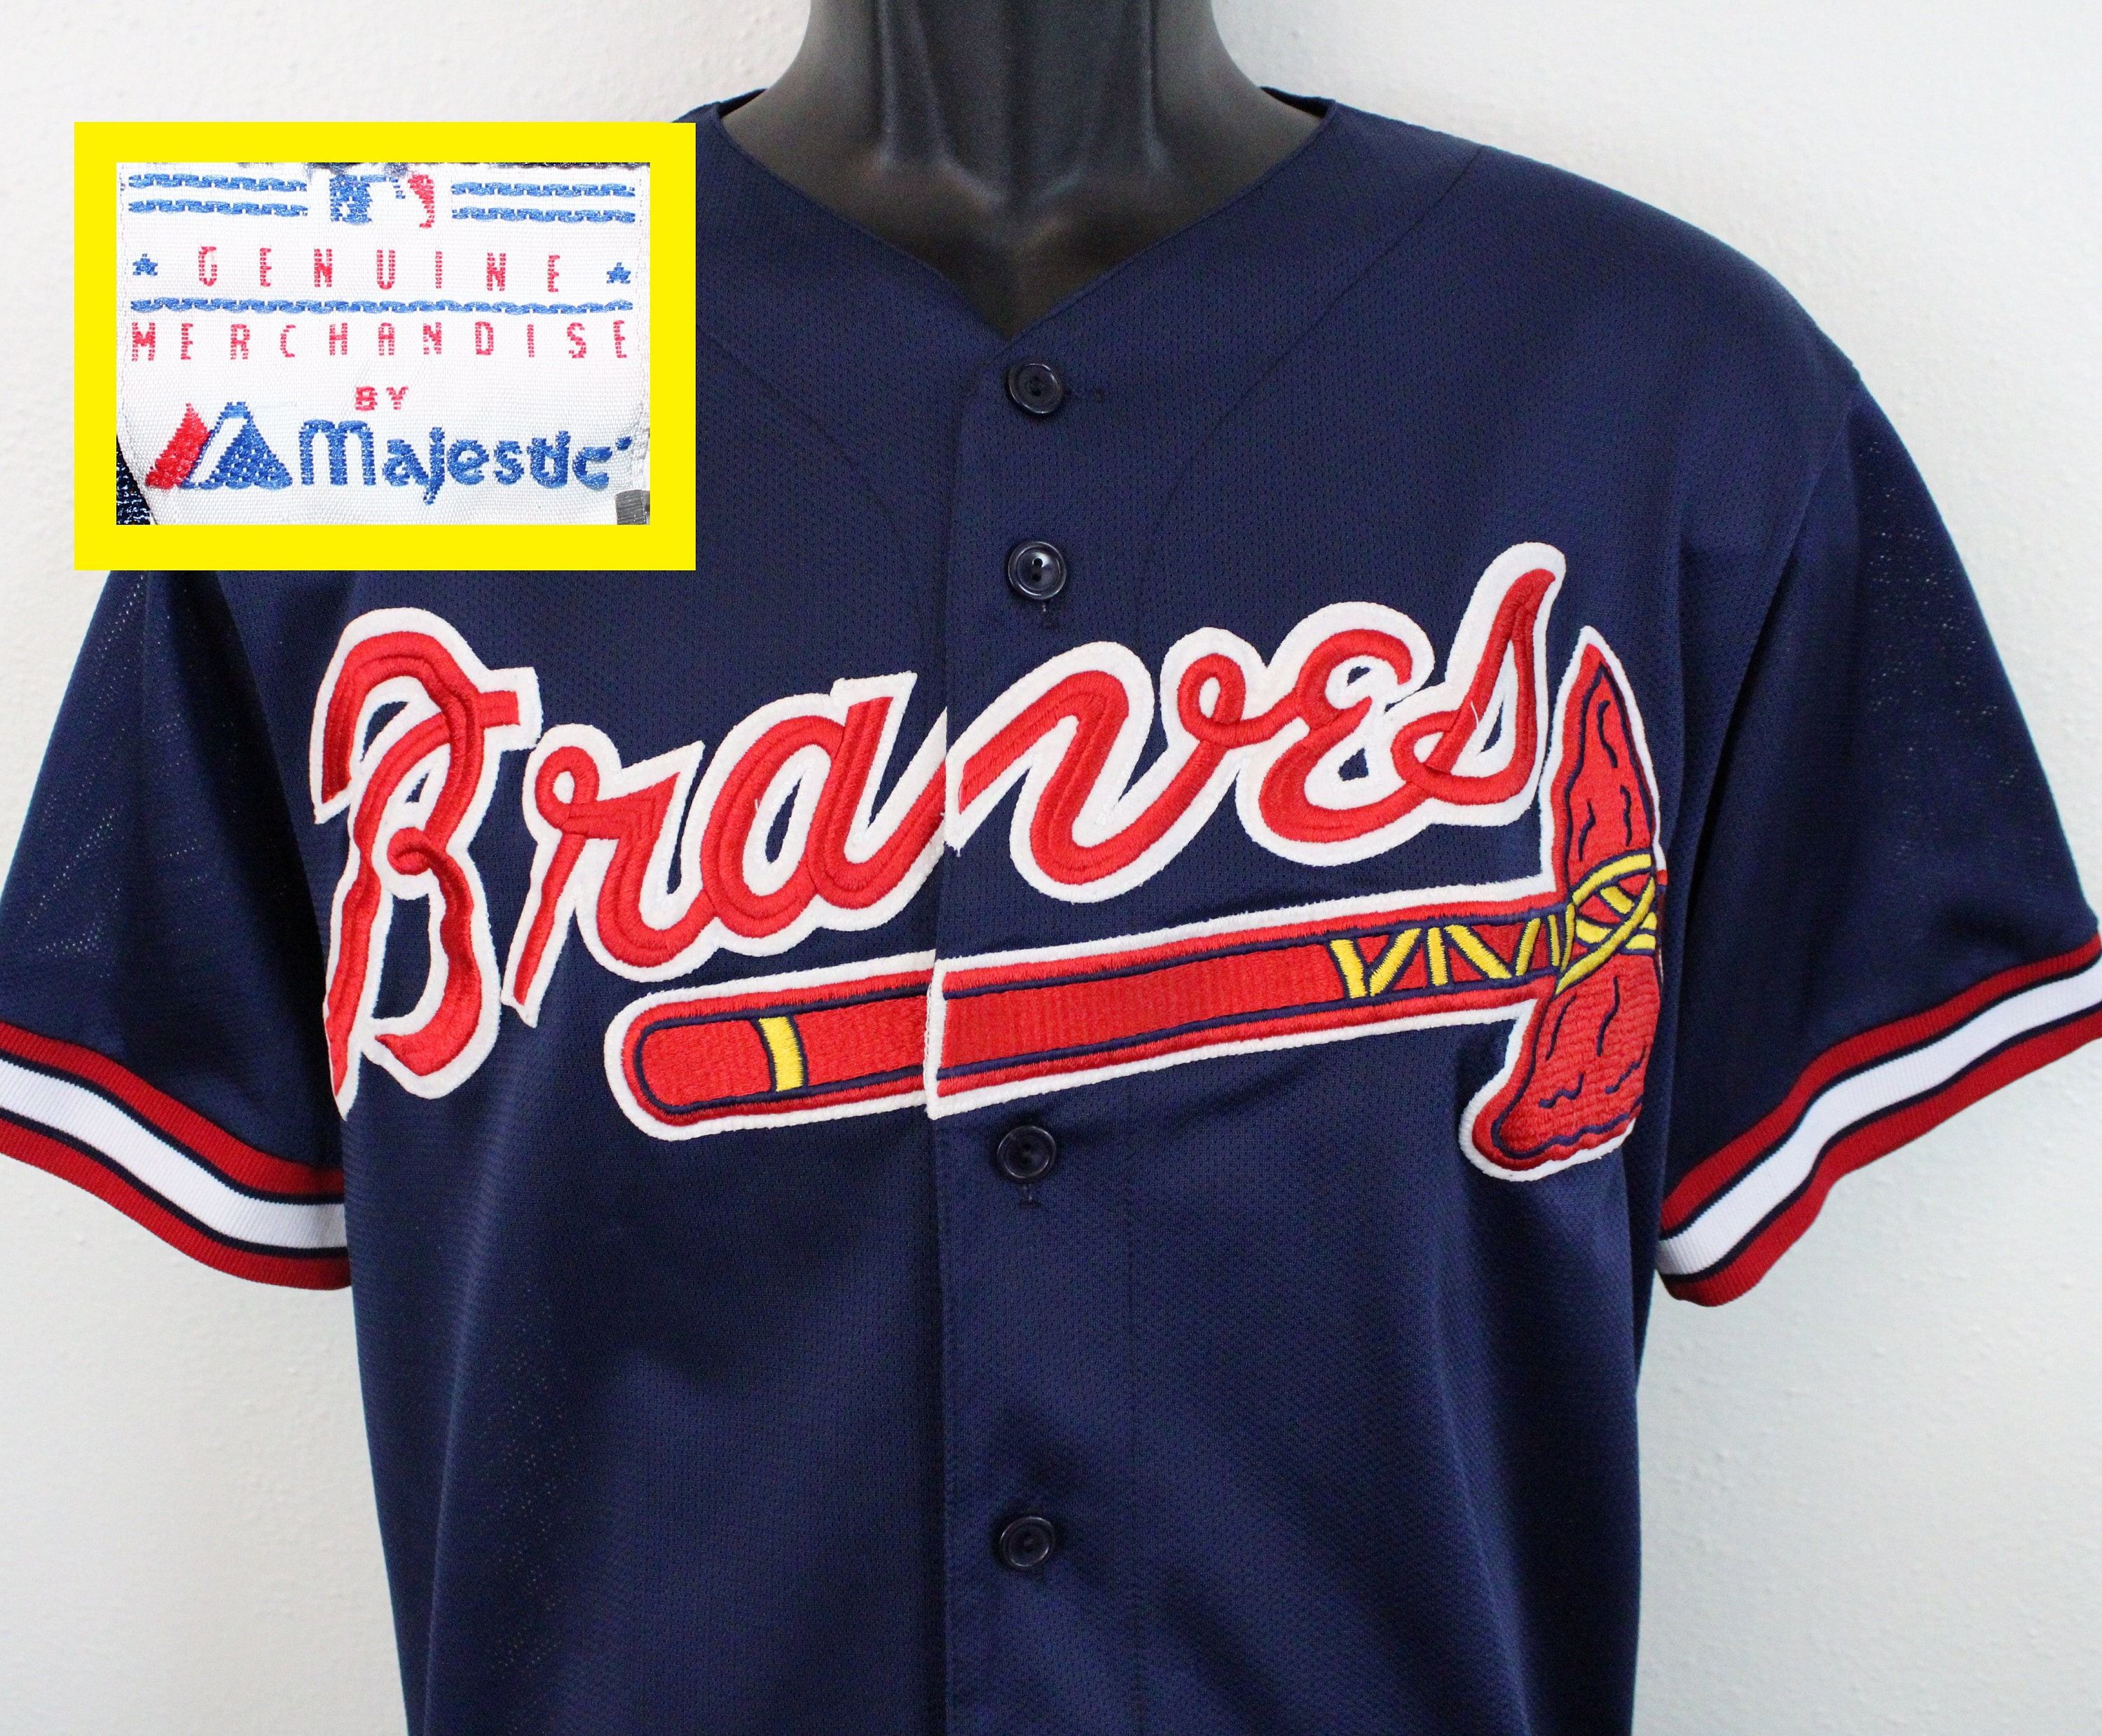 Take a look at the Braves gold trimmed World Series gear